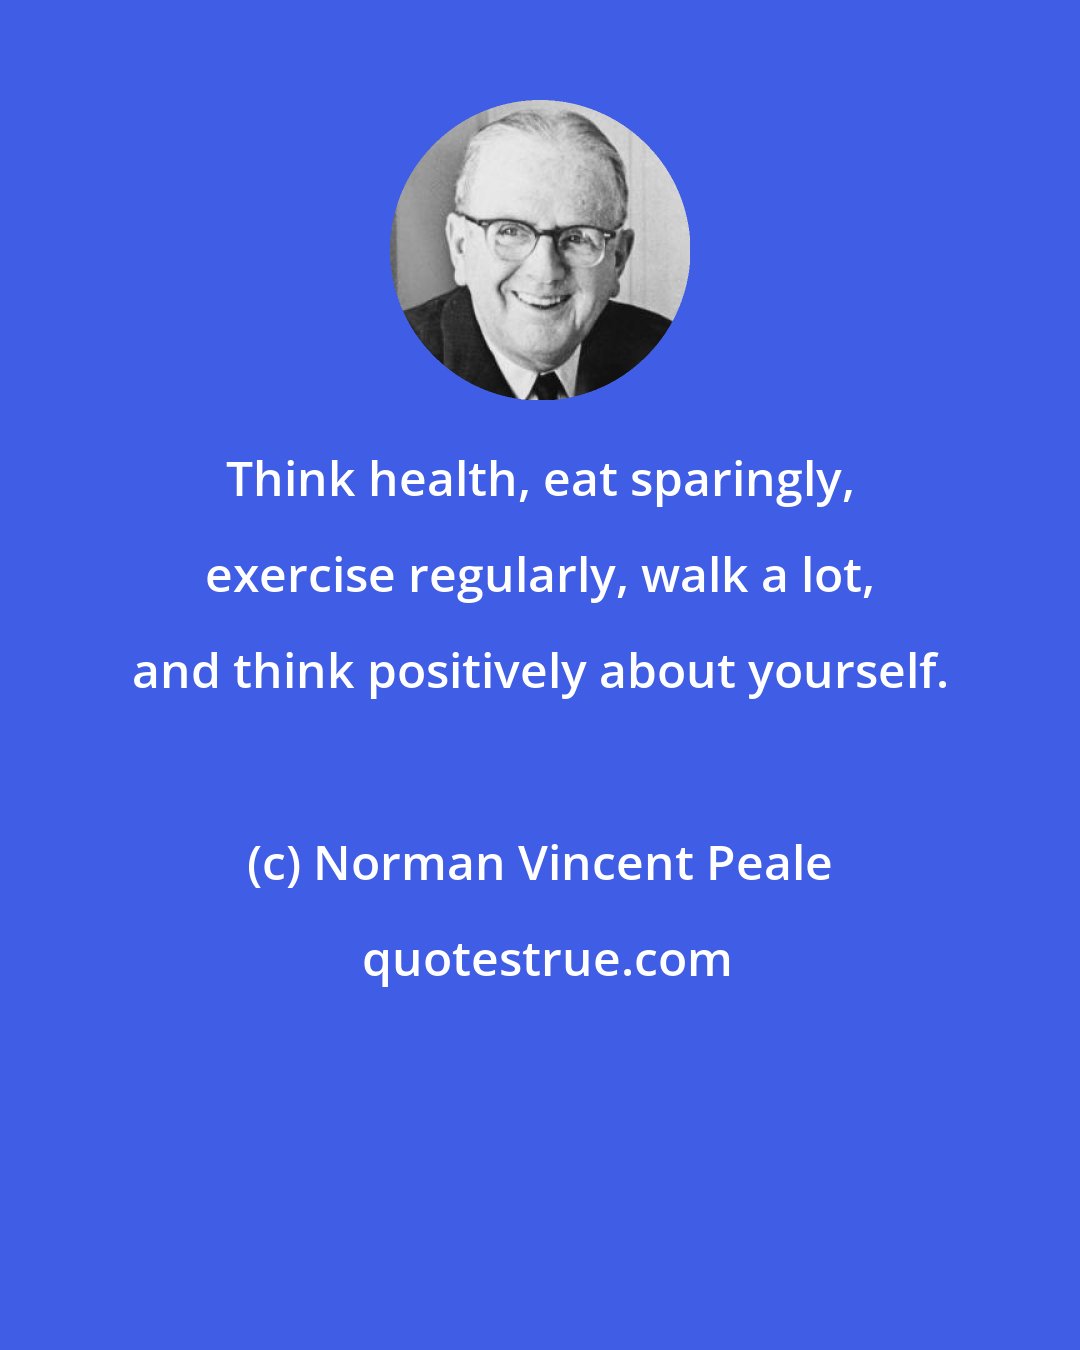 Norman Vincent Peale: Think health, eat sparingly, exercise regularly, walk a lot, and think positively about yourself.